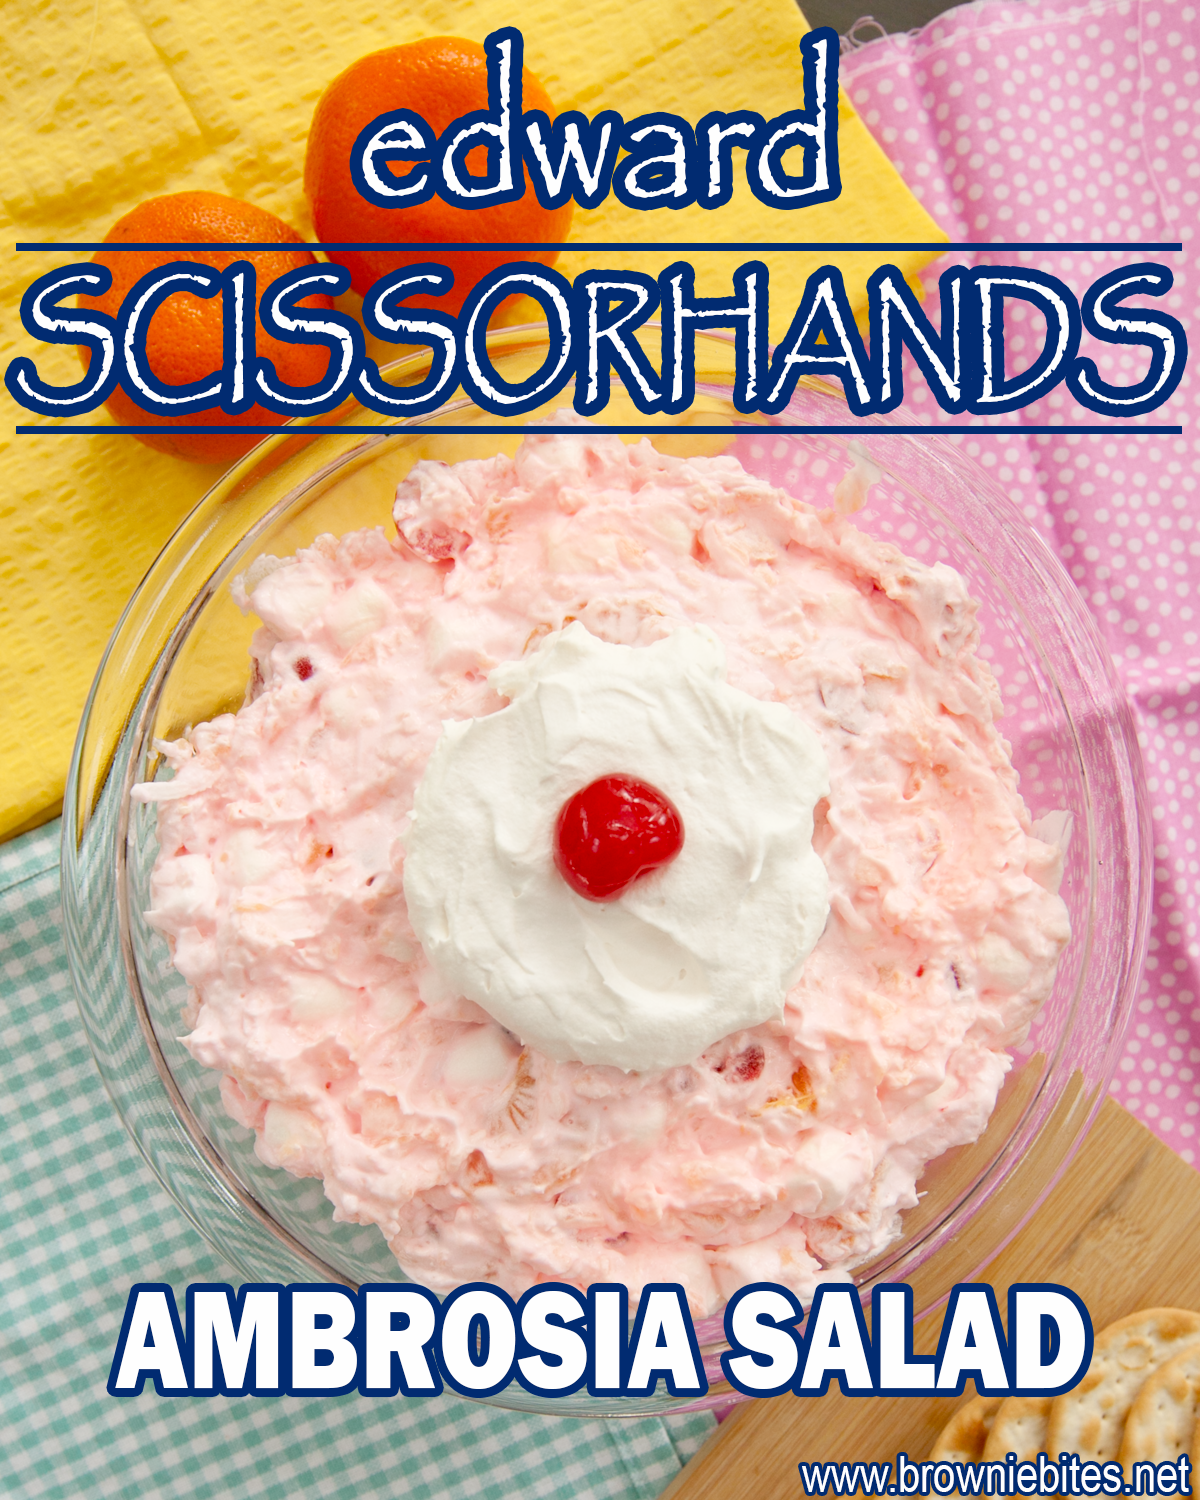 An overhead view of Edward Scissorhands ambrosia salad with text for Pinterest.